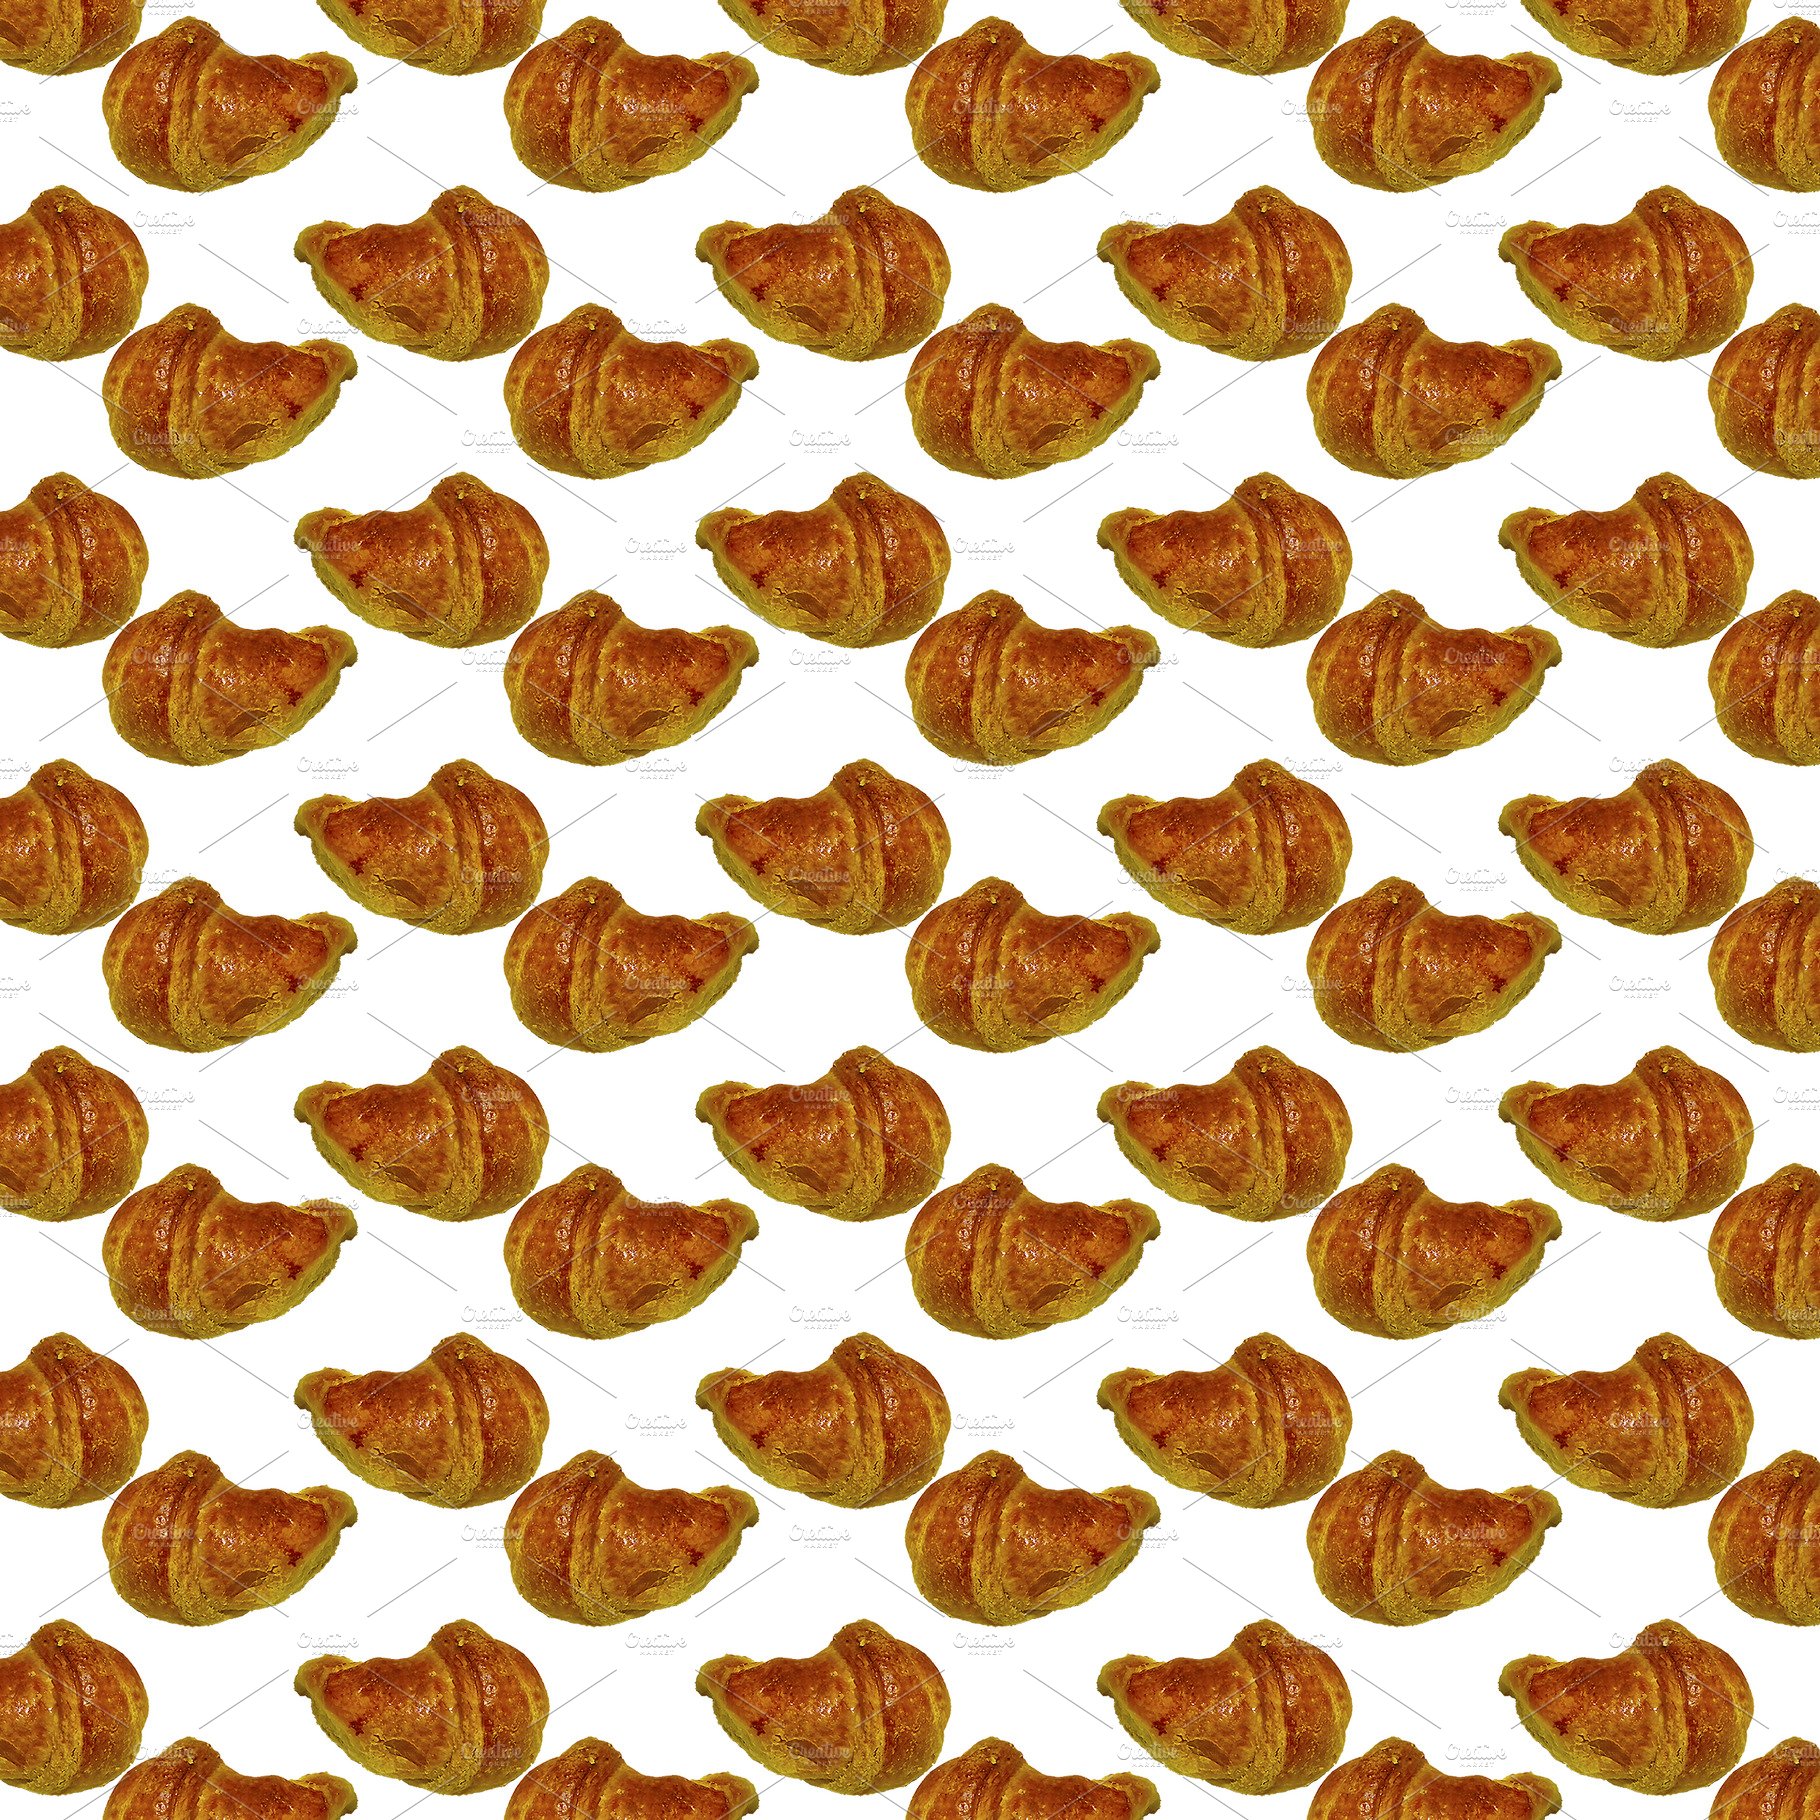 Biscuits photo motif pattern cover image.